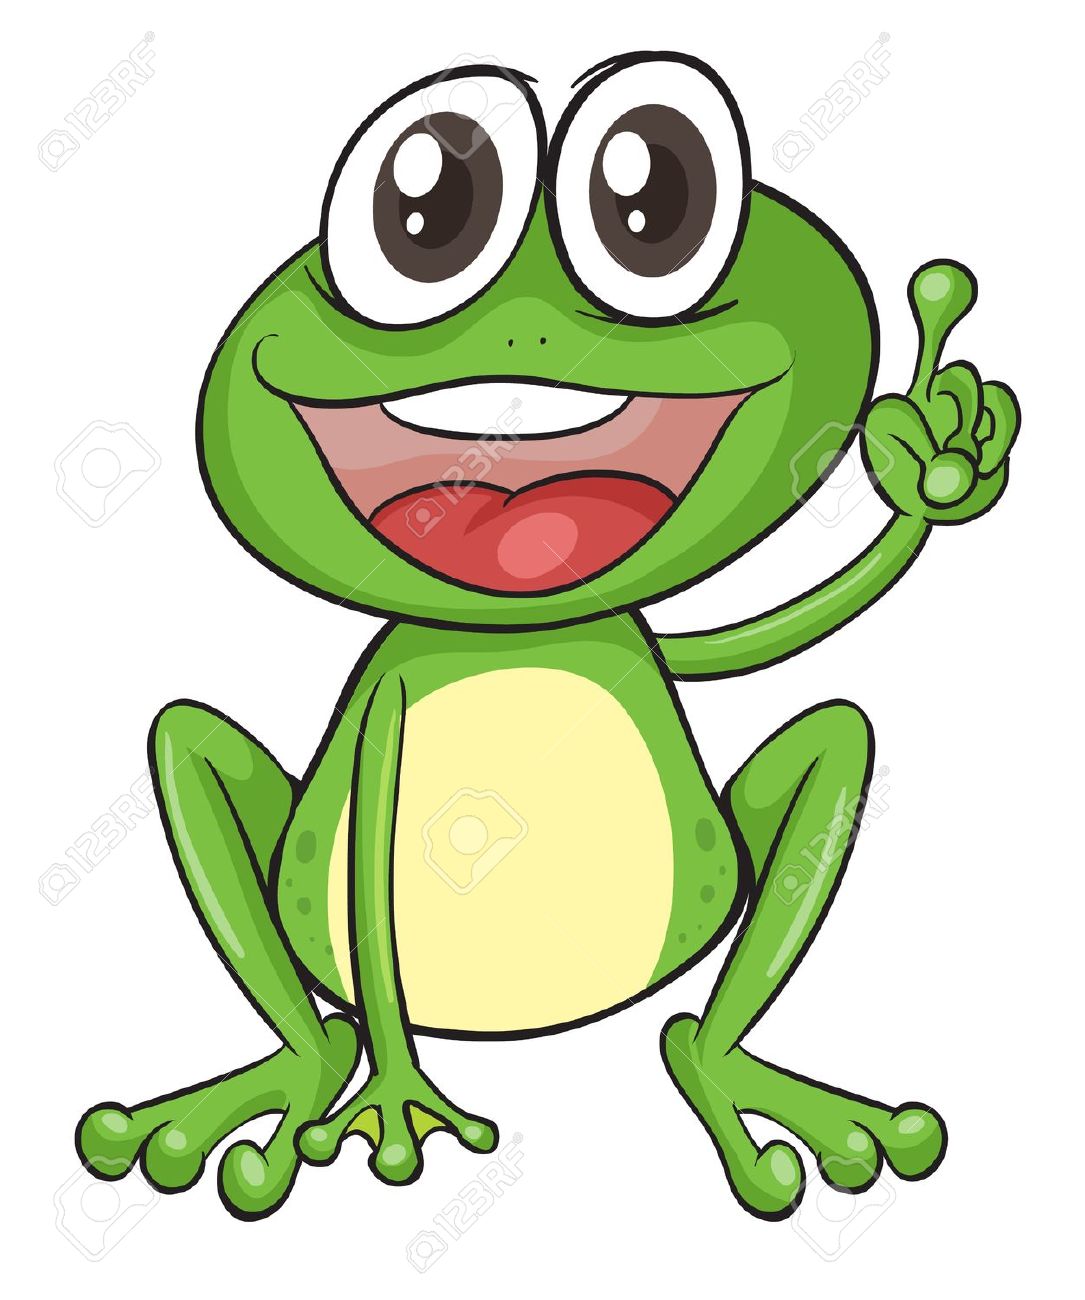 clipart of a frog - photo #23